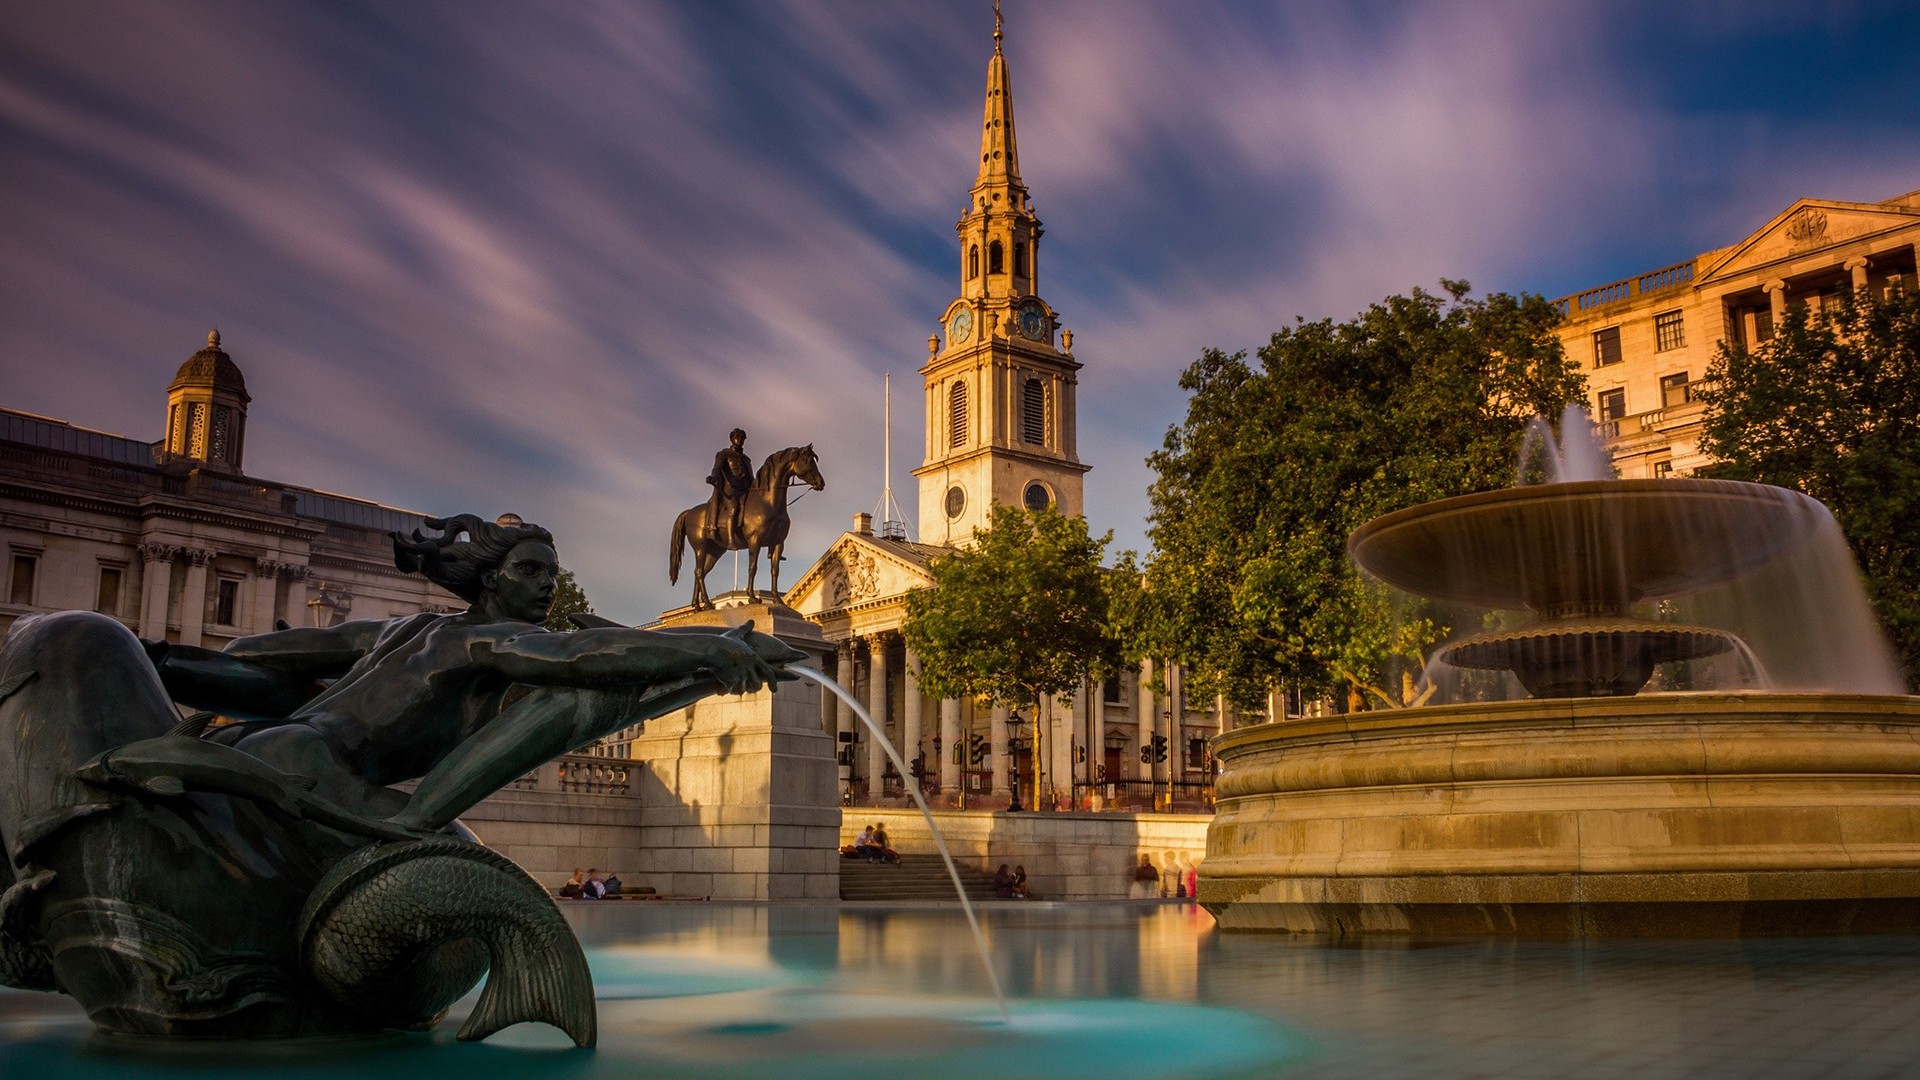 architecture, Building, Cityscape, City, Capital, Long exposure, London, England, UK, Statue, Sculpture, Water, Fountain, Church, Old building, Trees, People, Town square, Clouds Wallpaper